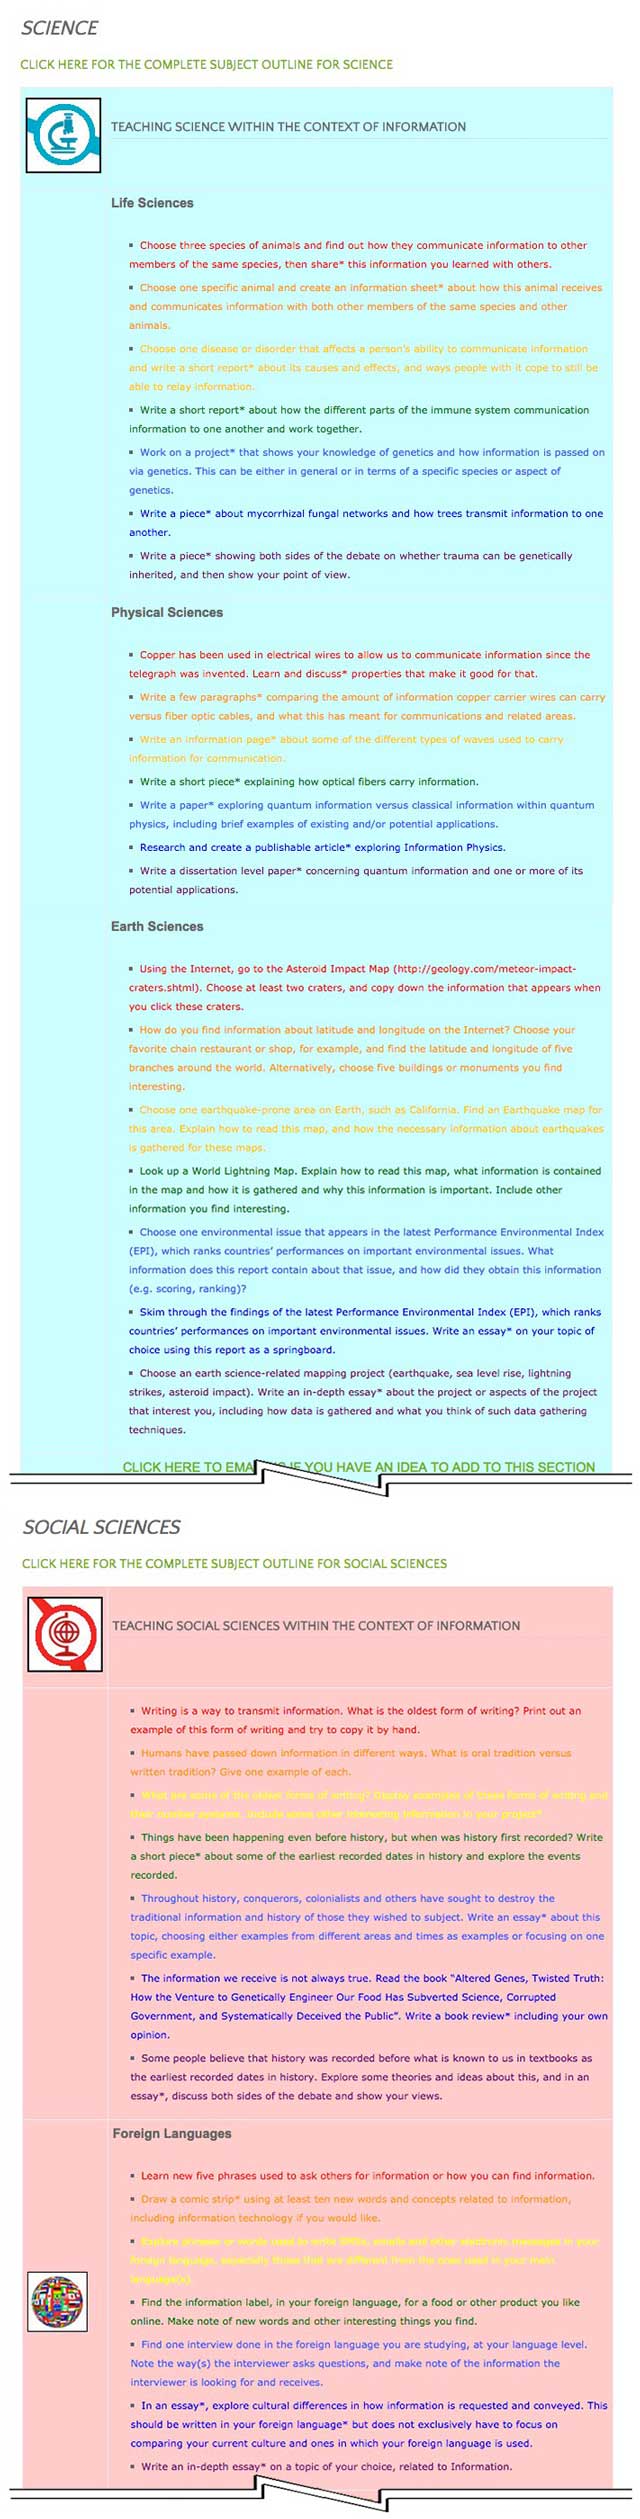 This last week the core team transferred the third 25% of the written content for the Information Lesson Plan to the website, as you see here. This lesson plan purposed to teach all subjects, to all learning levels, in any learning environment, using the central theme of “Information” is now 75% completed on our website. , designs for a better world